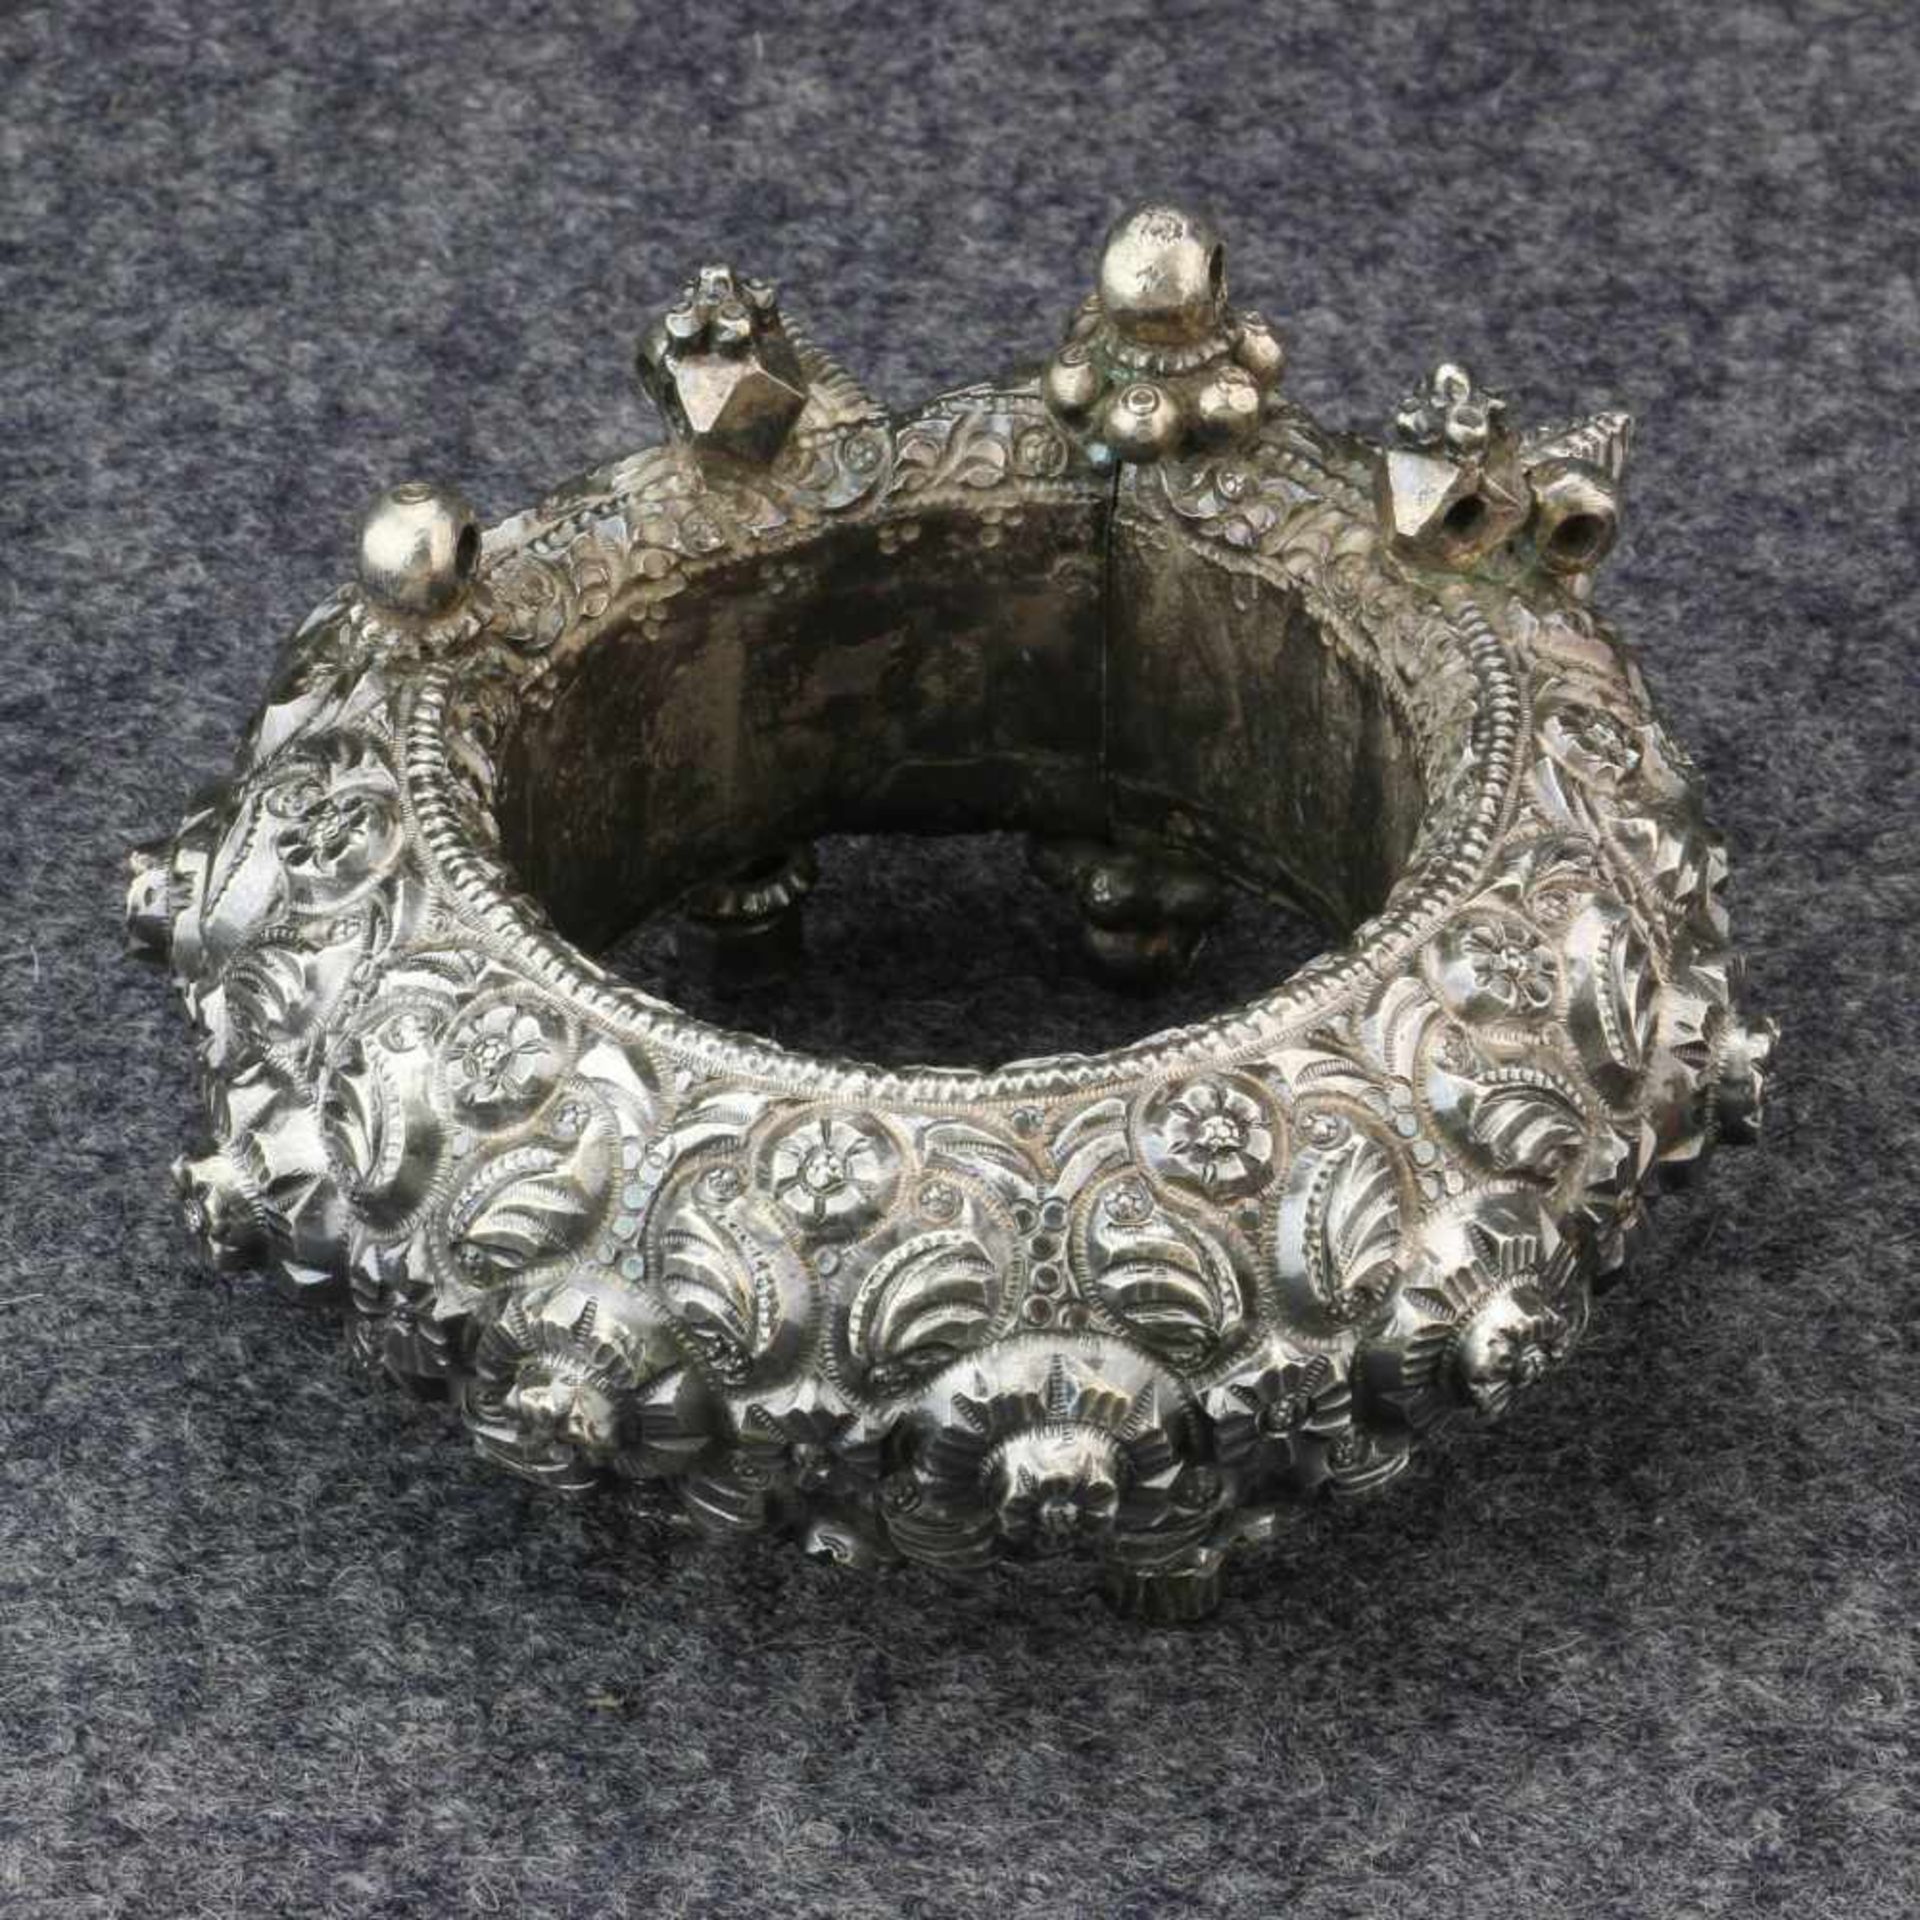 India, Gujarat, Vadodara, Dabhoi, silver hollow anklet,with conical points and designs of flowers